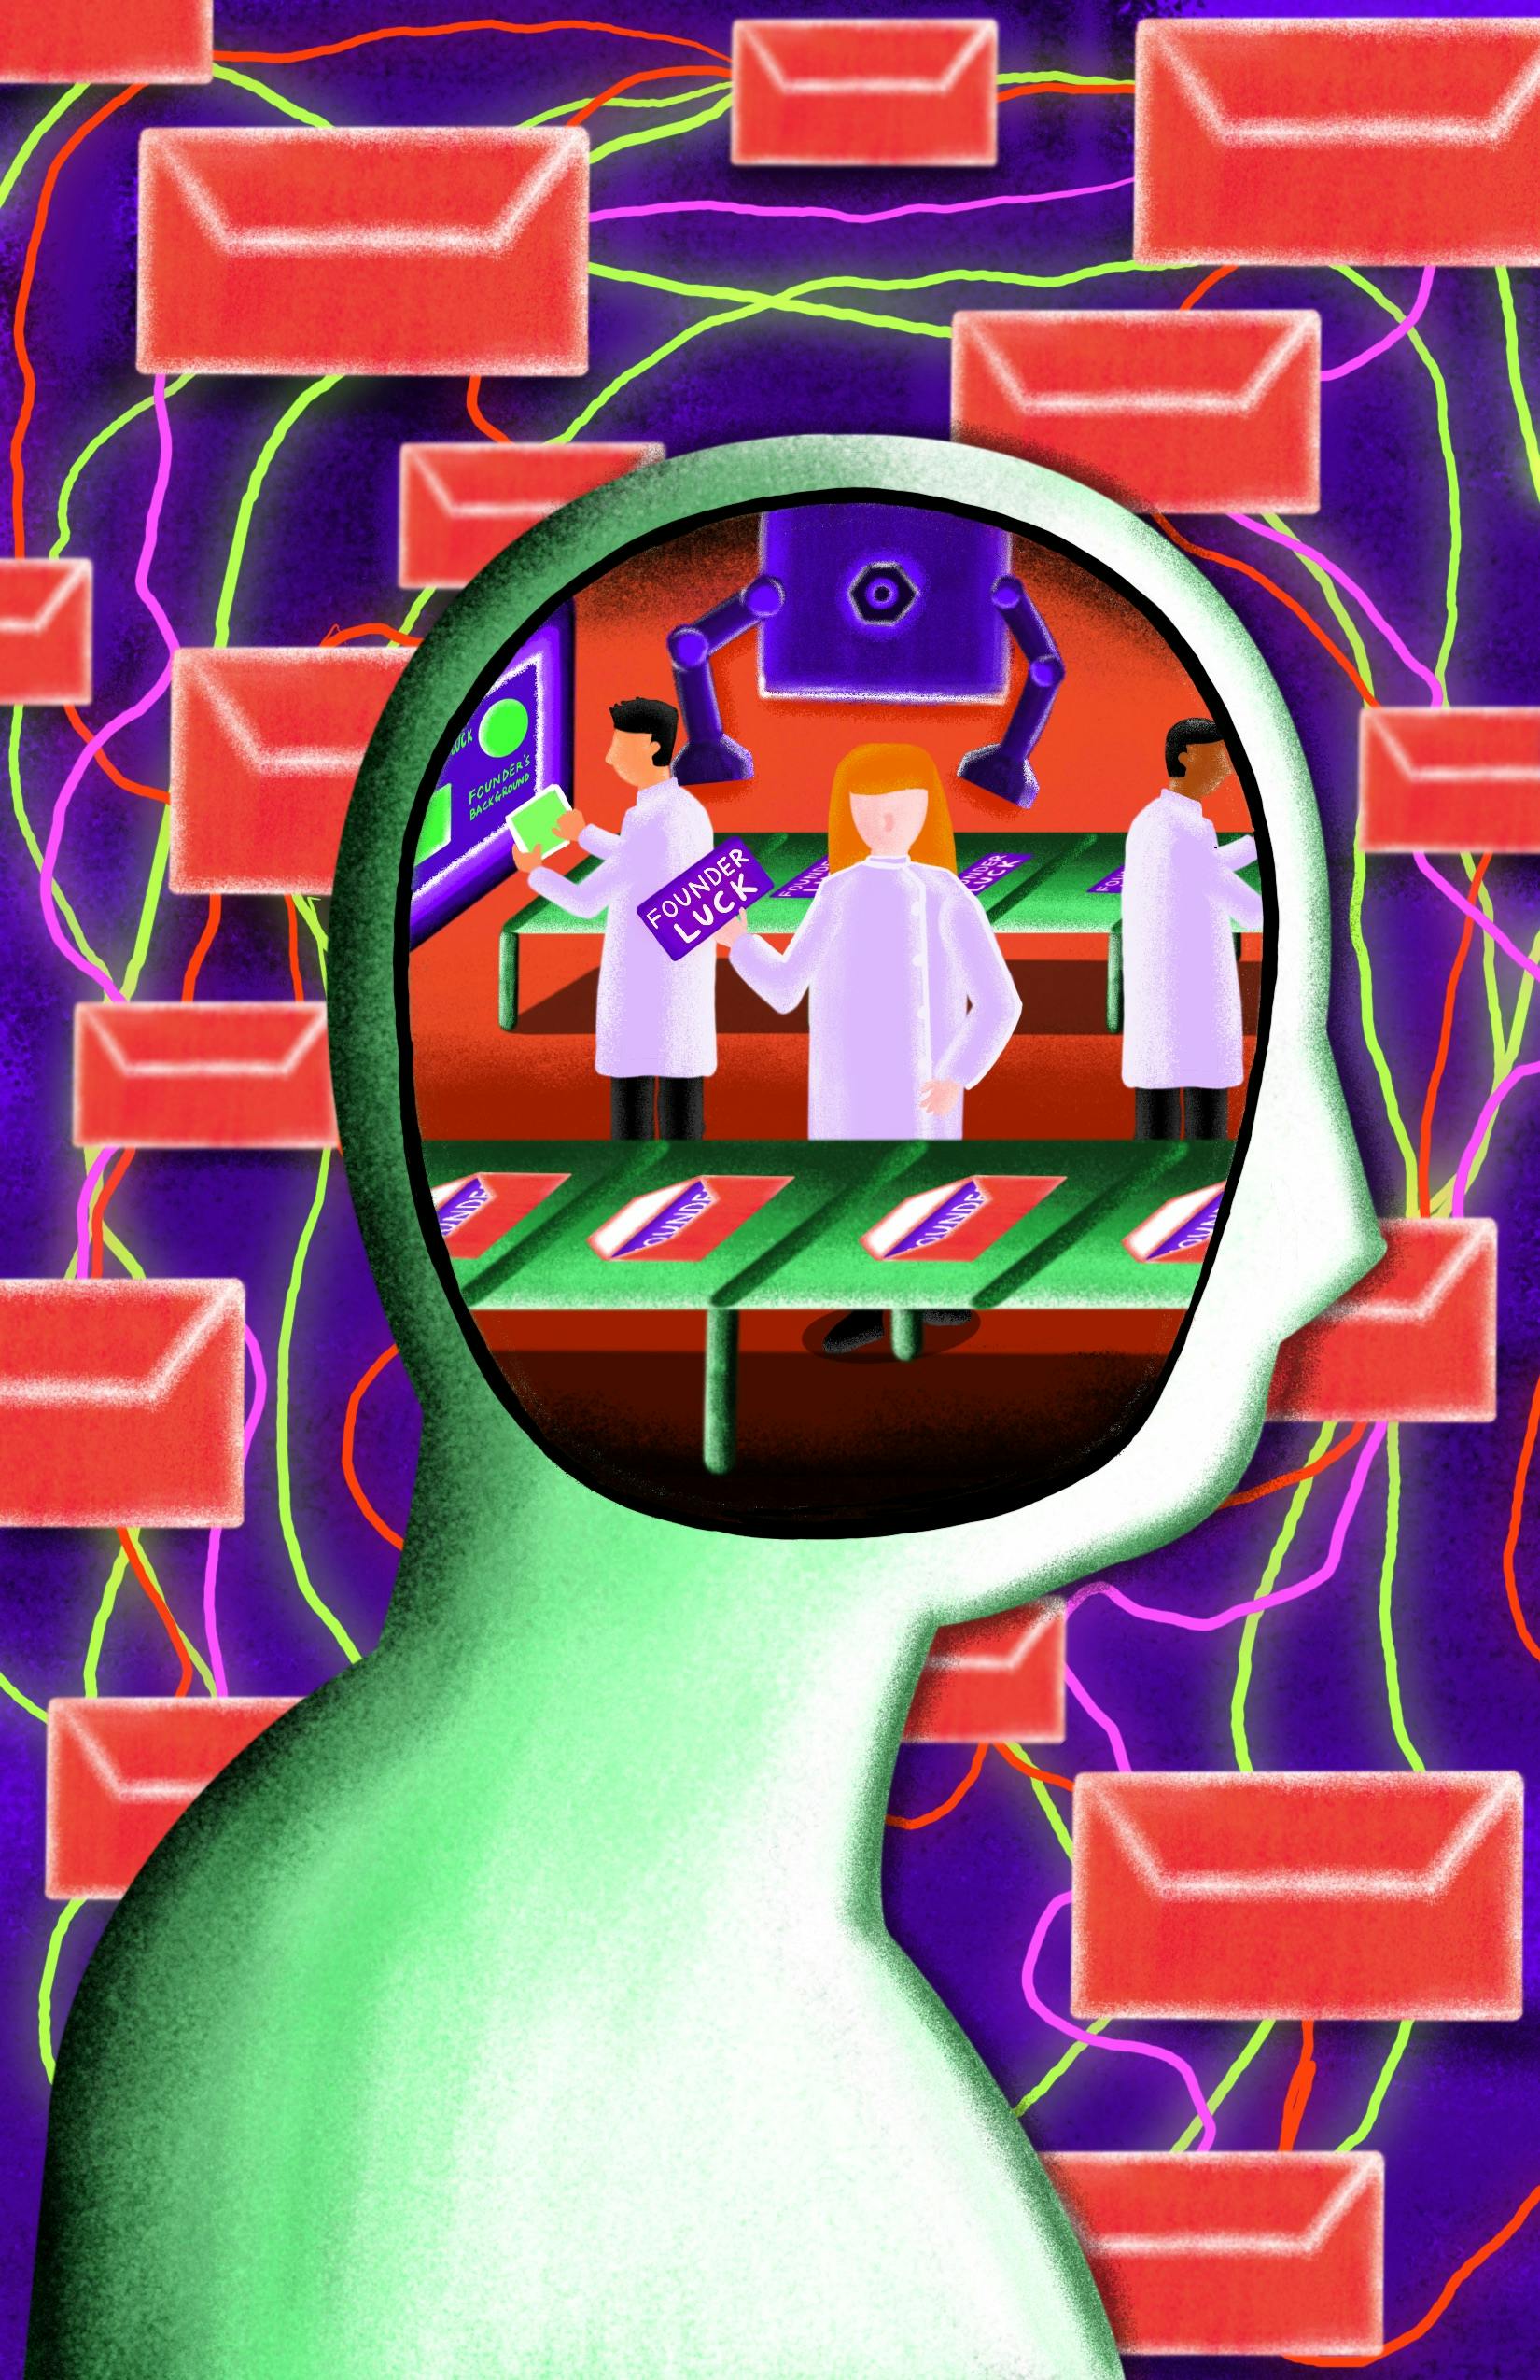 An abstract illustration of a head silhouette. Inside the head, a factory-like setting can be seen with workers slipping rectangles labeled "founder luck" inside red envelopes.